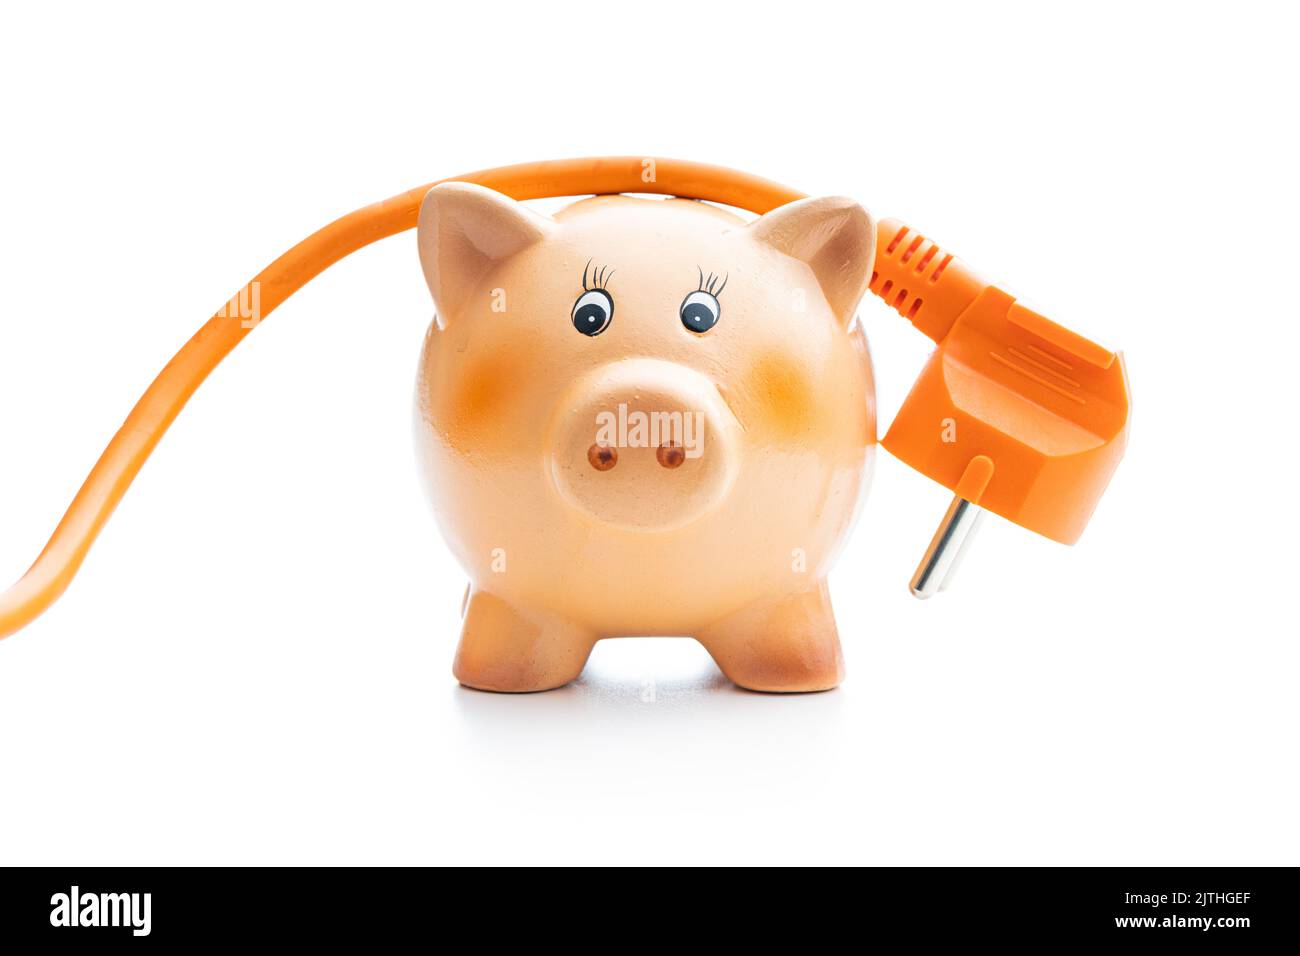 Orange extension Power Cord and piggy bank isolated on white background. Concept of increasing electricity prices. Stock Photo